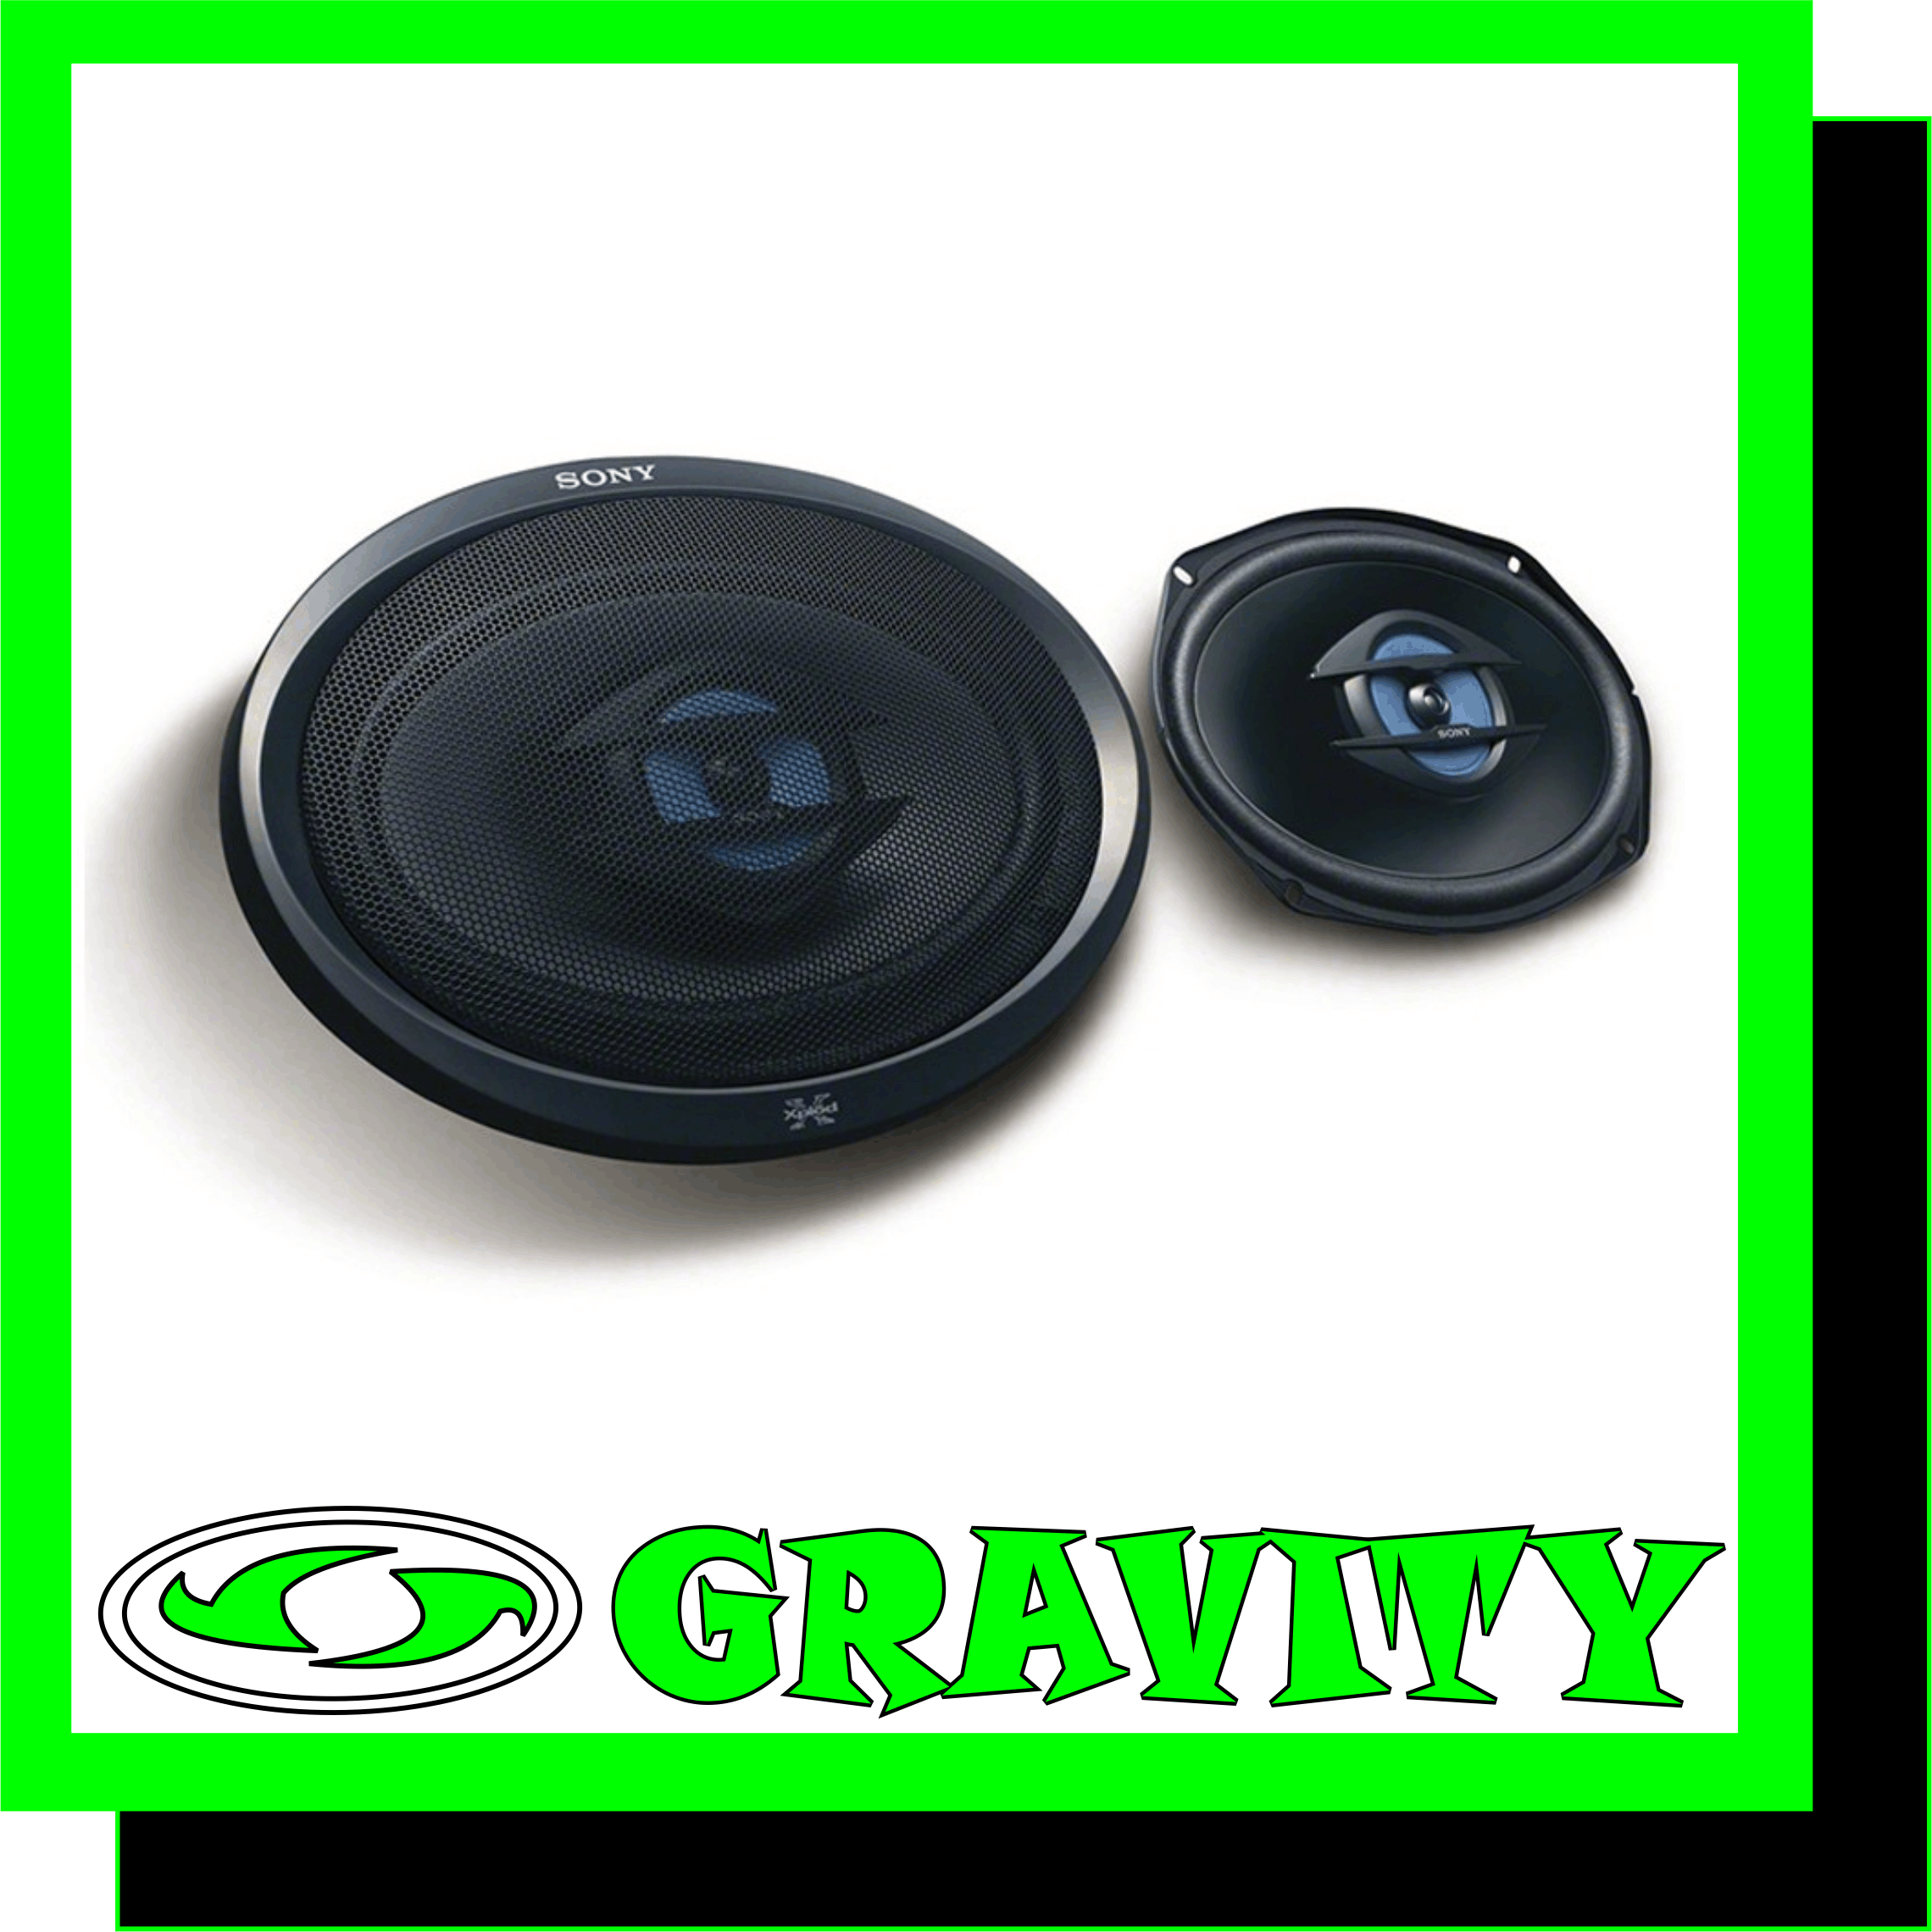 6X9 2-Way Speakers Peak Power: 260W Rated Power: 35W Woofer Magnet Material: Ferrite Woofer Diaphragm Material: Rubber-Coated Sold Per Pair gravity audio car sound equipment durban 